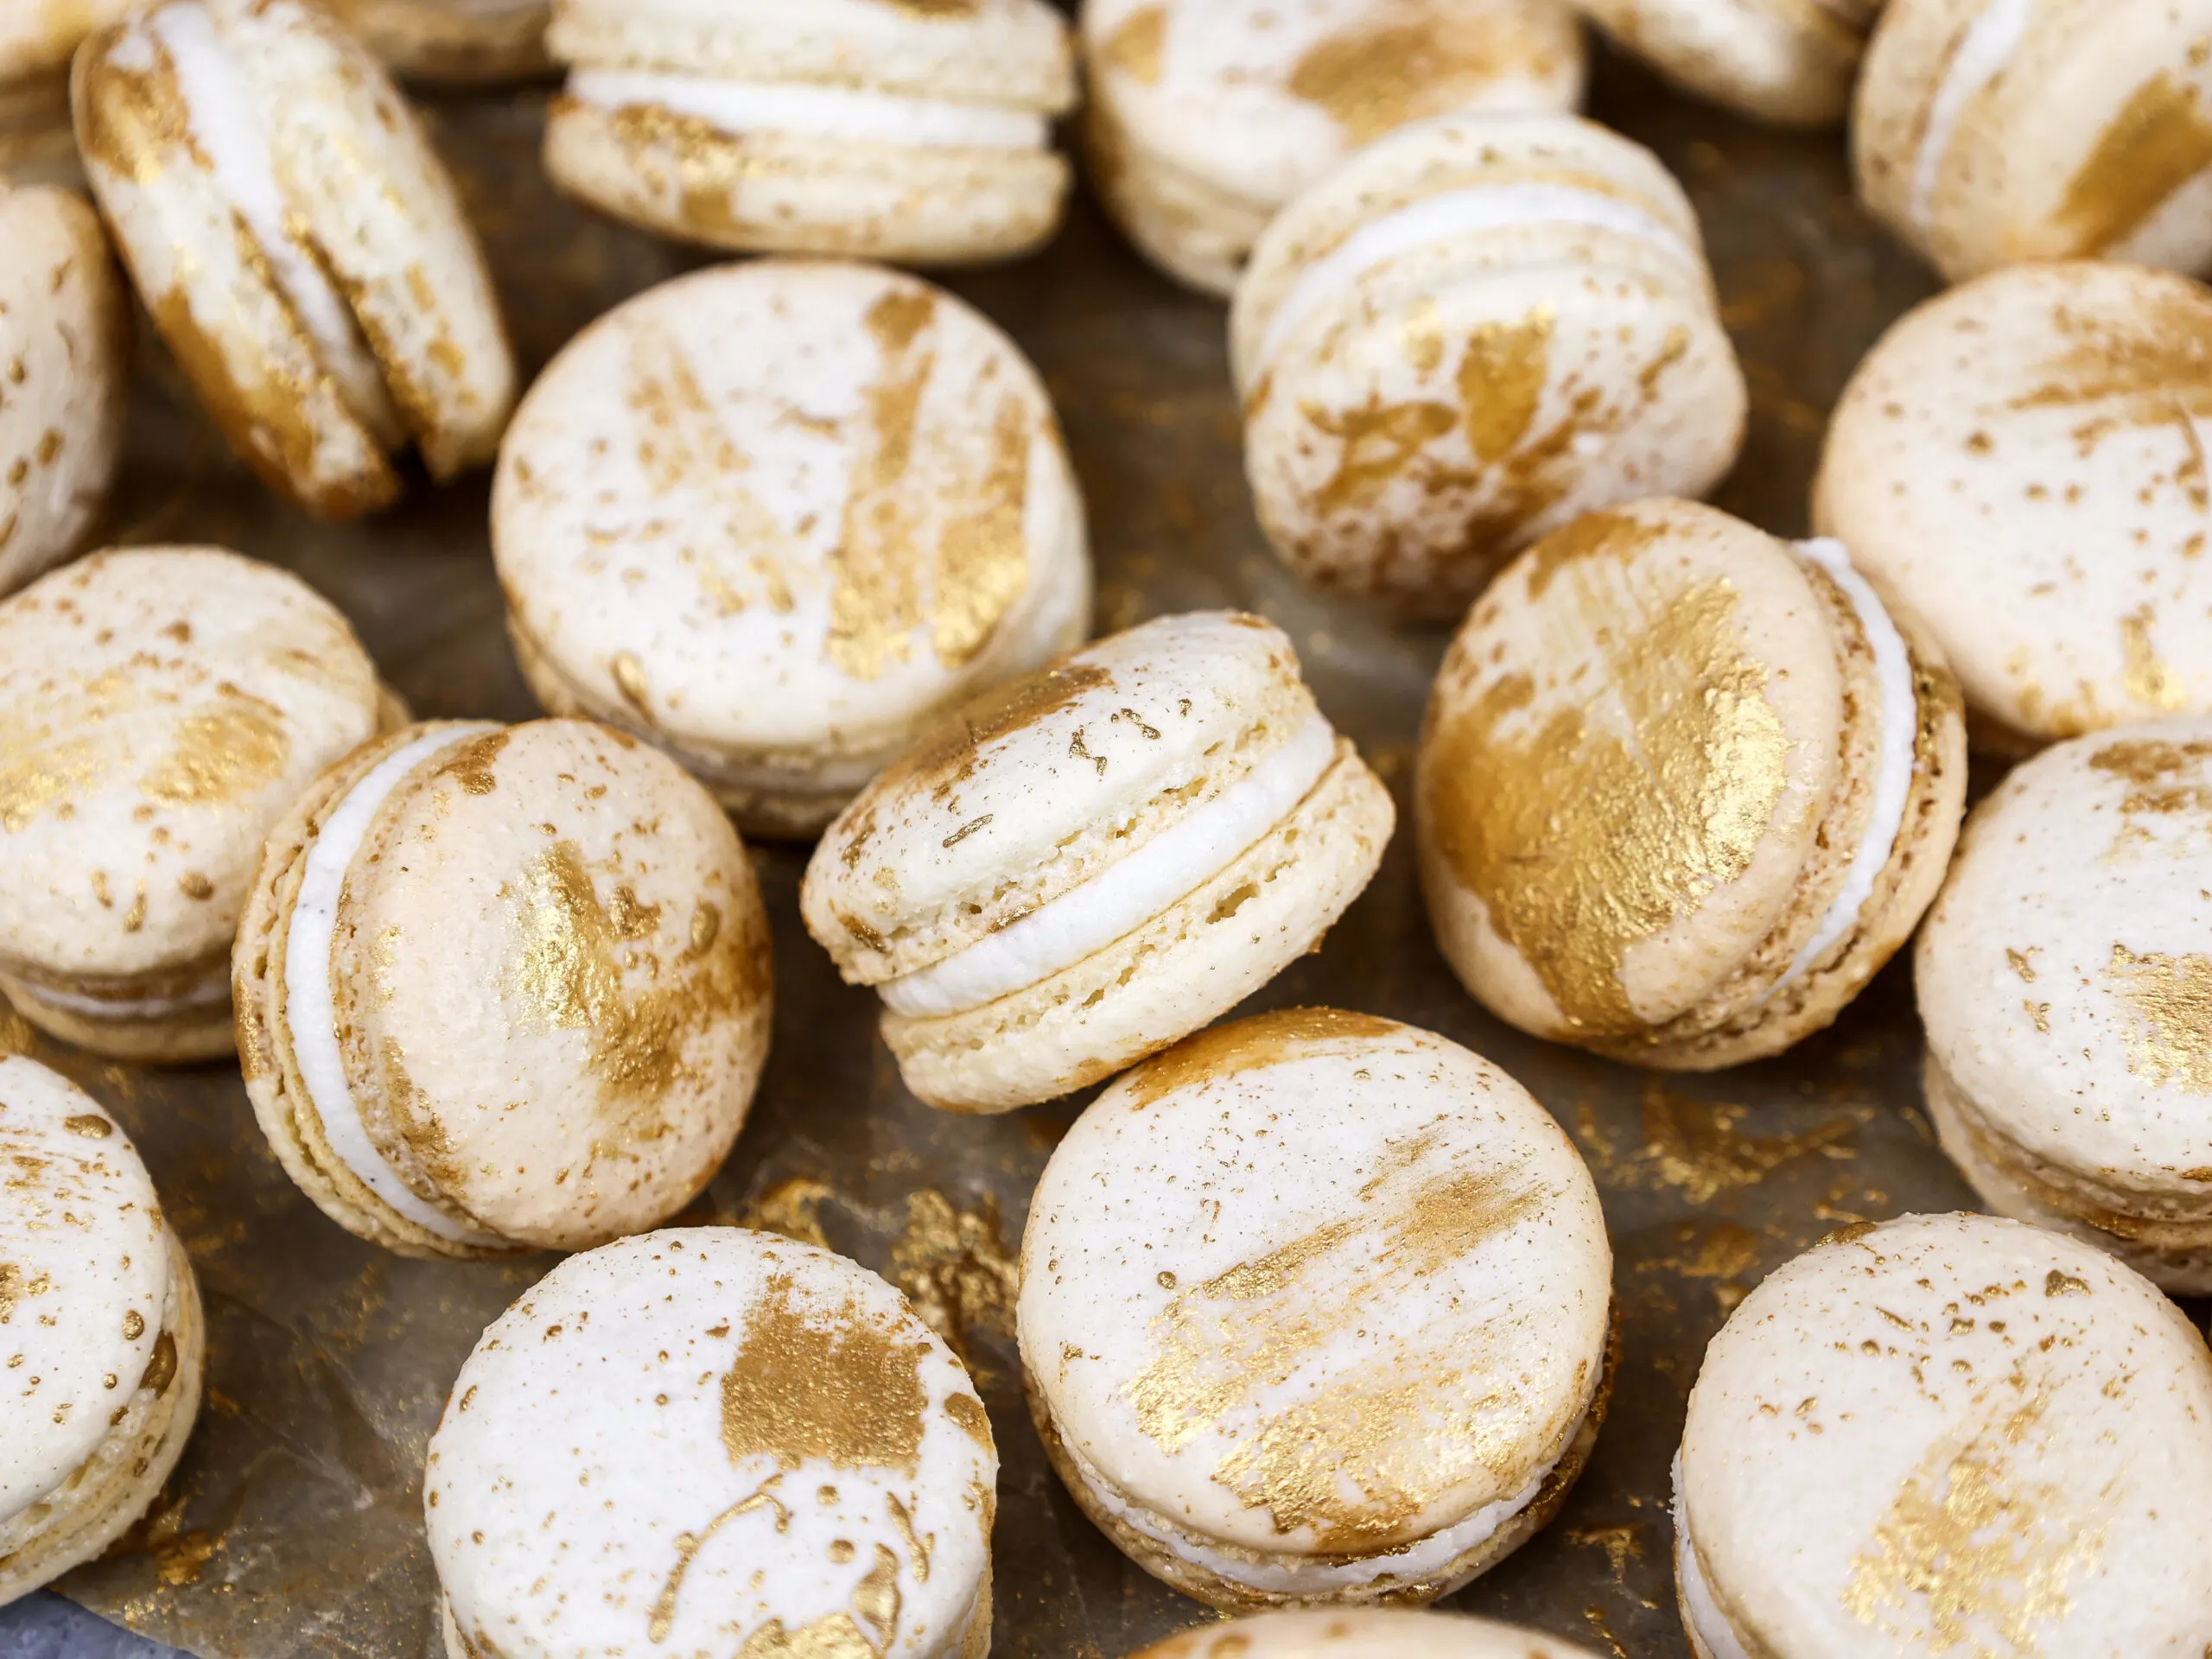 image of vanilla bean macarons made using the french method and decorated with edible gold paint